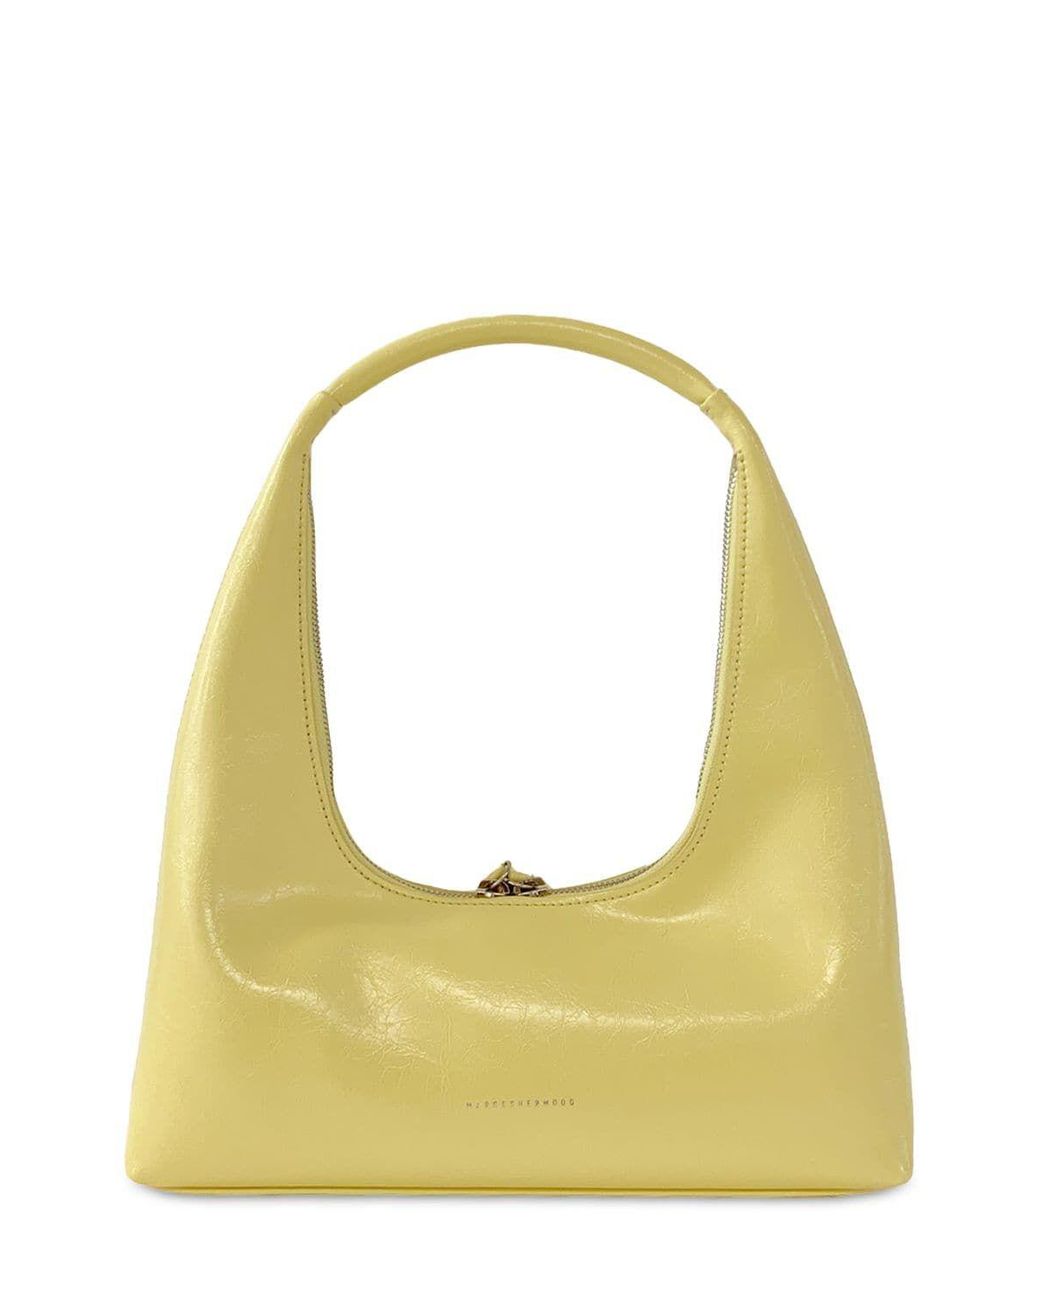 Marge Sherwood Hobo Leather Shoulder Bag in Yellow | Lyst